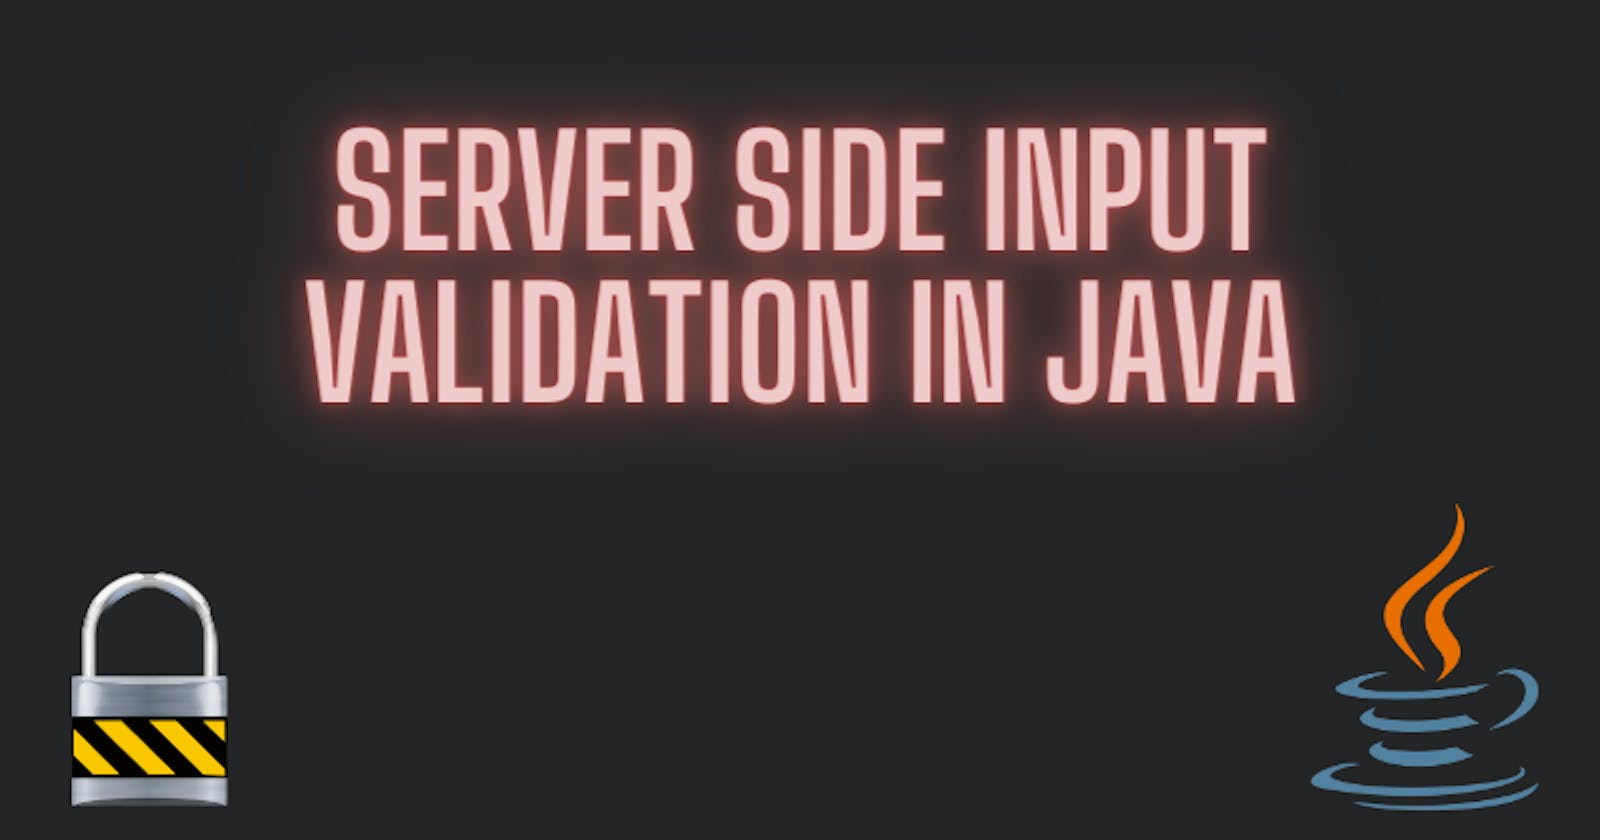 Server-side input validation and how to do it in Java